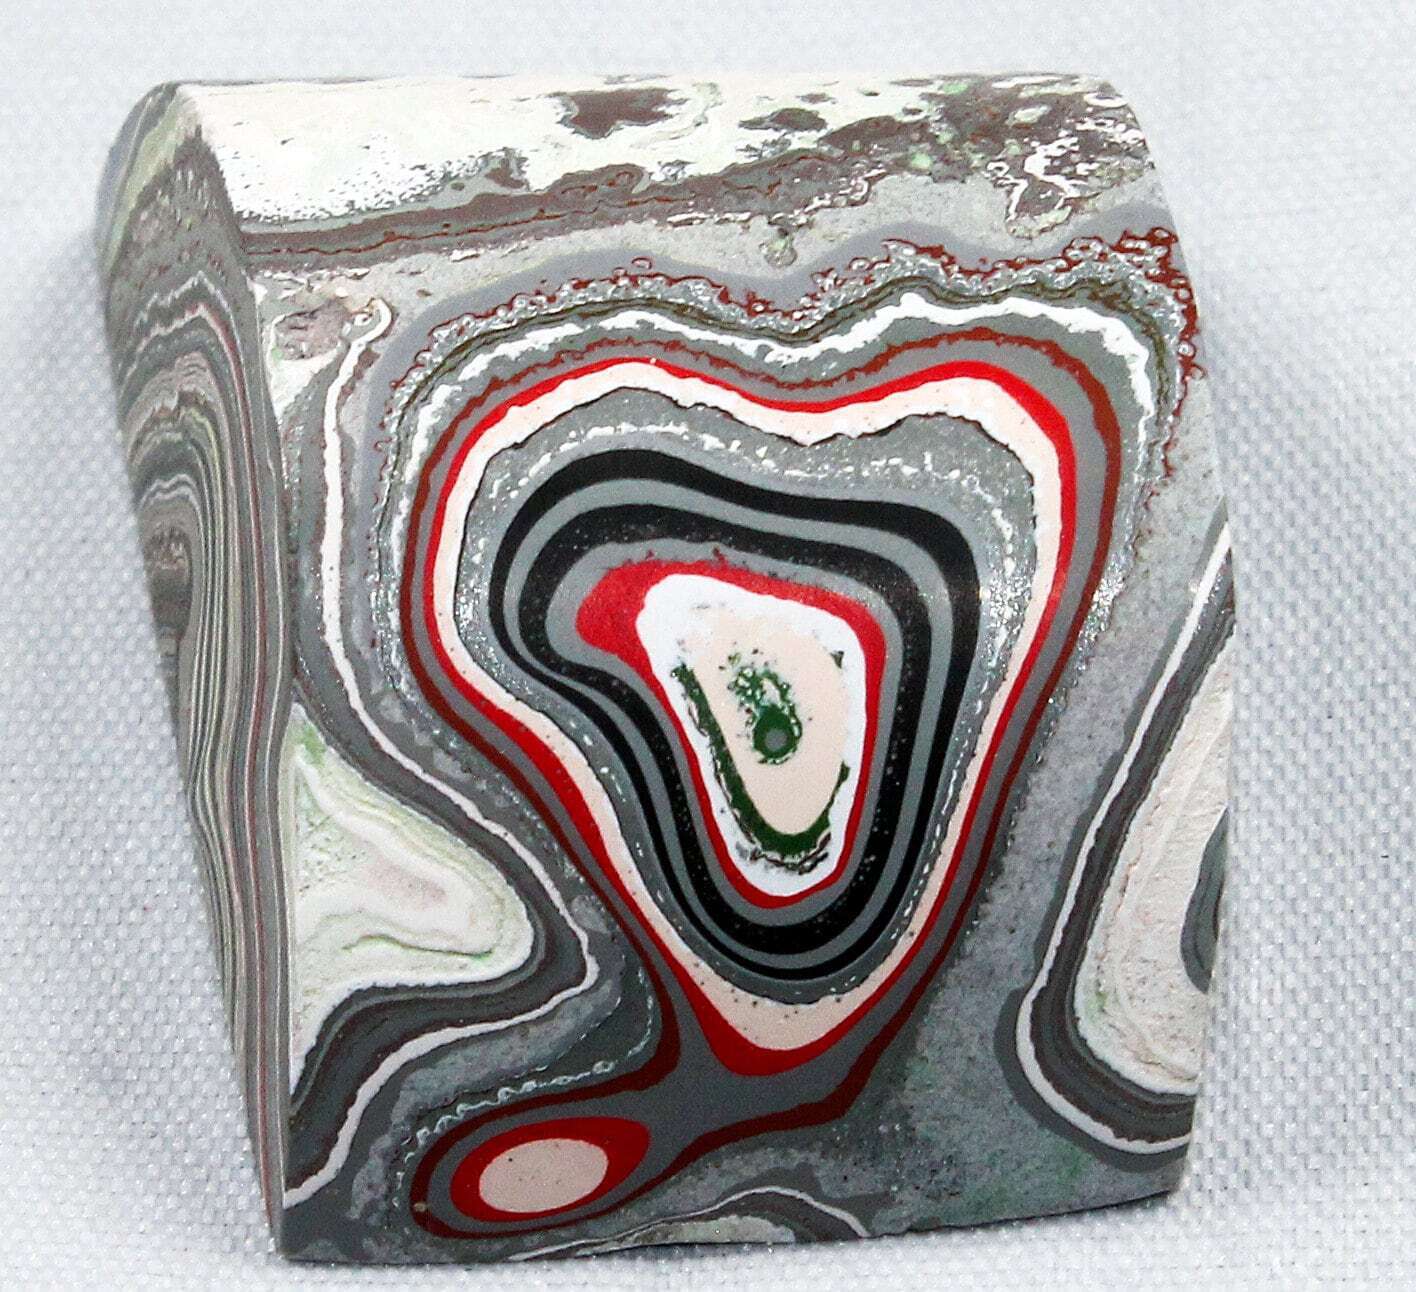 Finished Piece of Fordite - Premium Fordite - 33.86mm x 23.12mm x 15.75mm     (